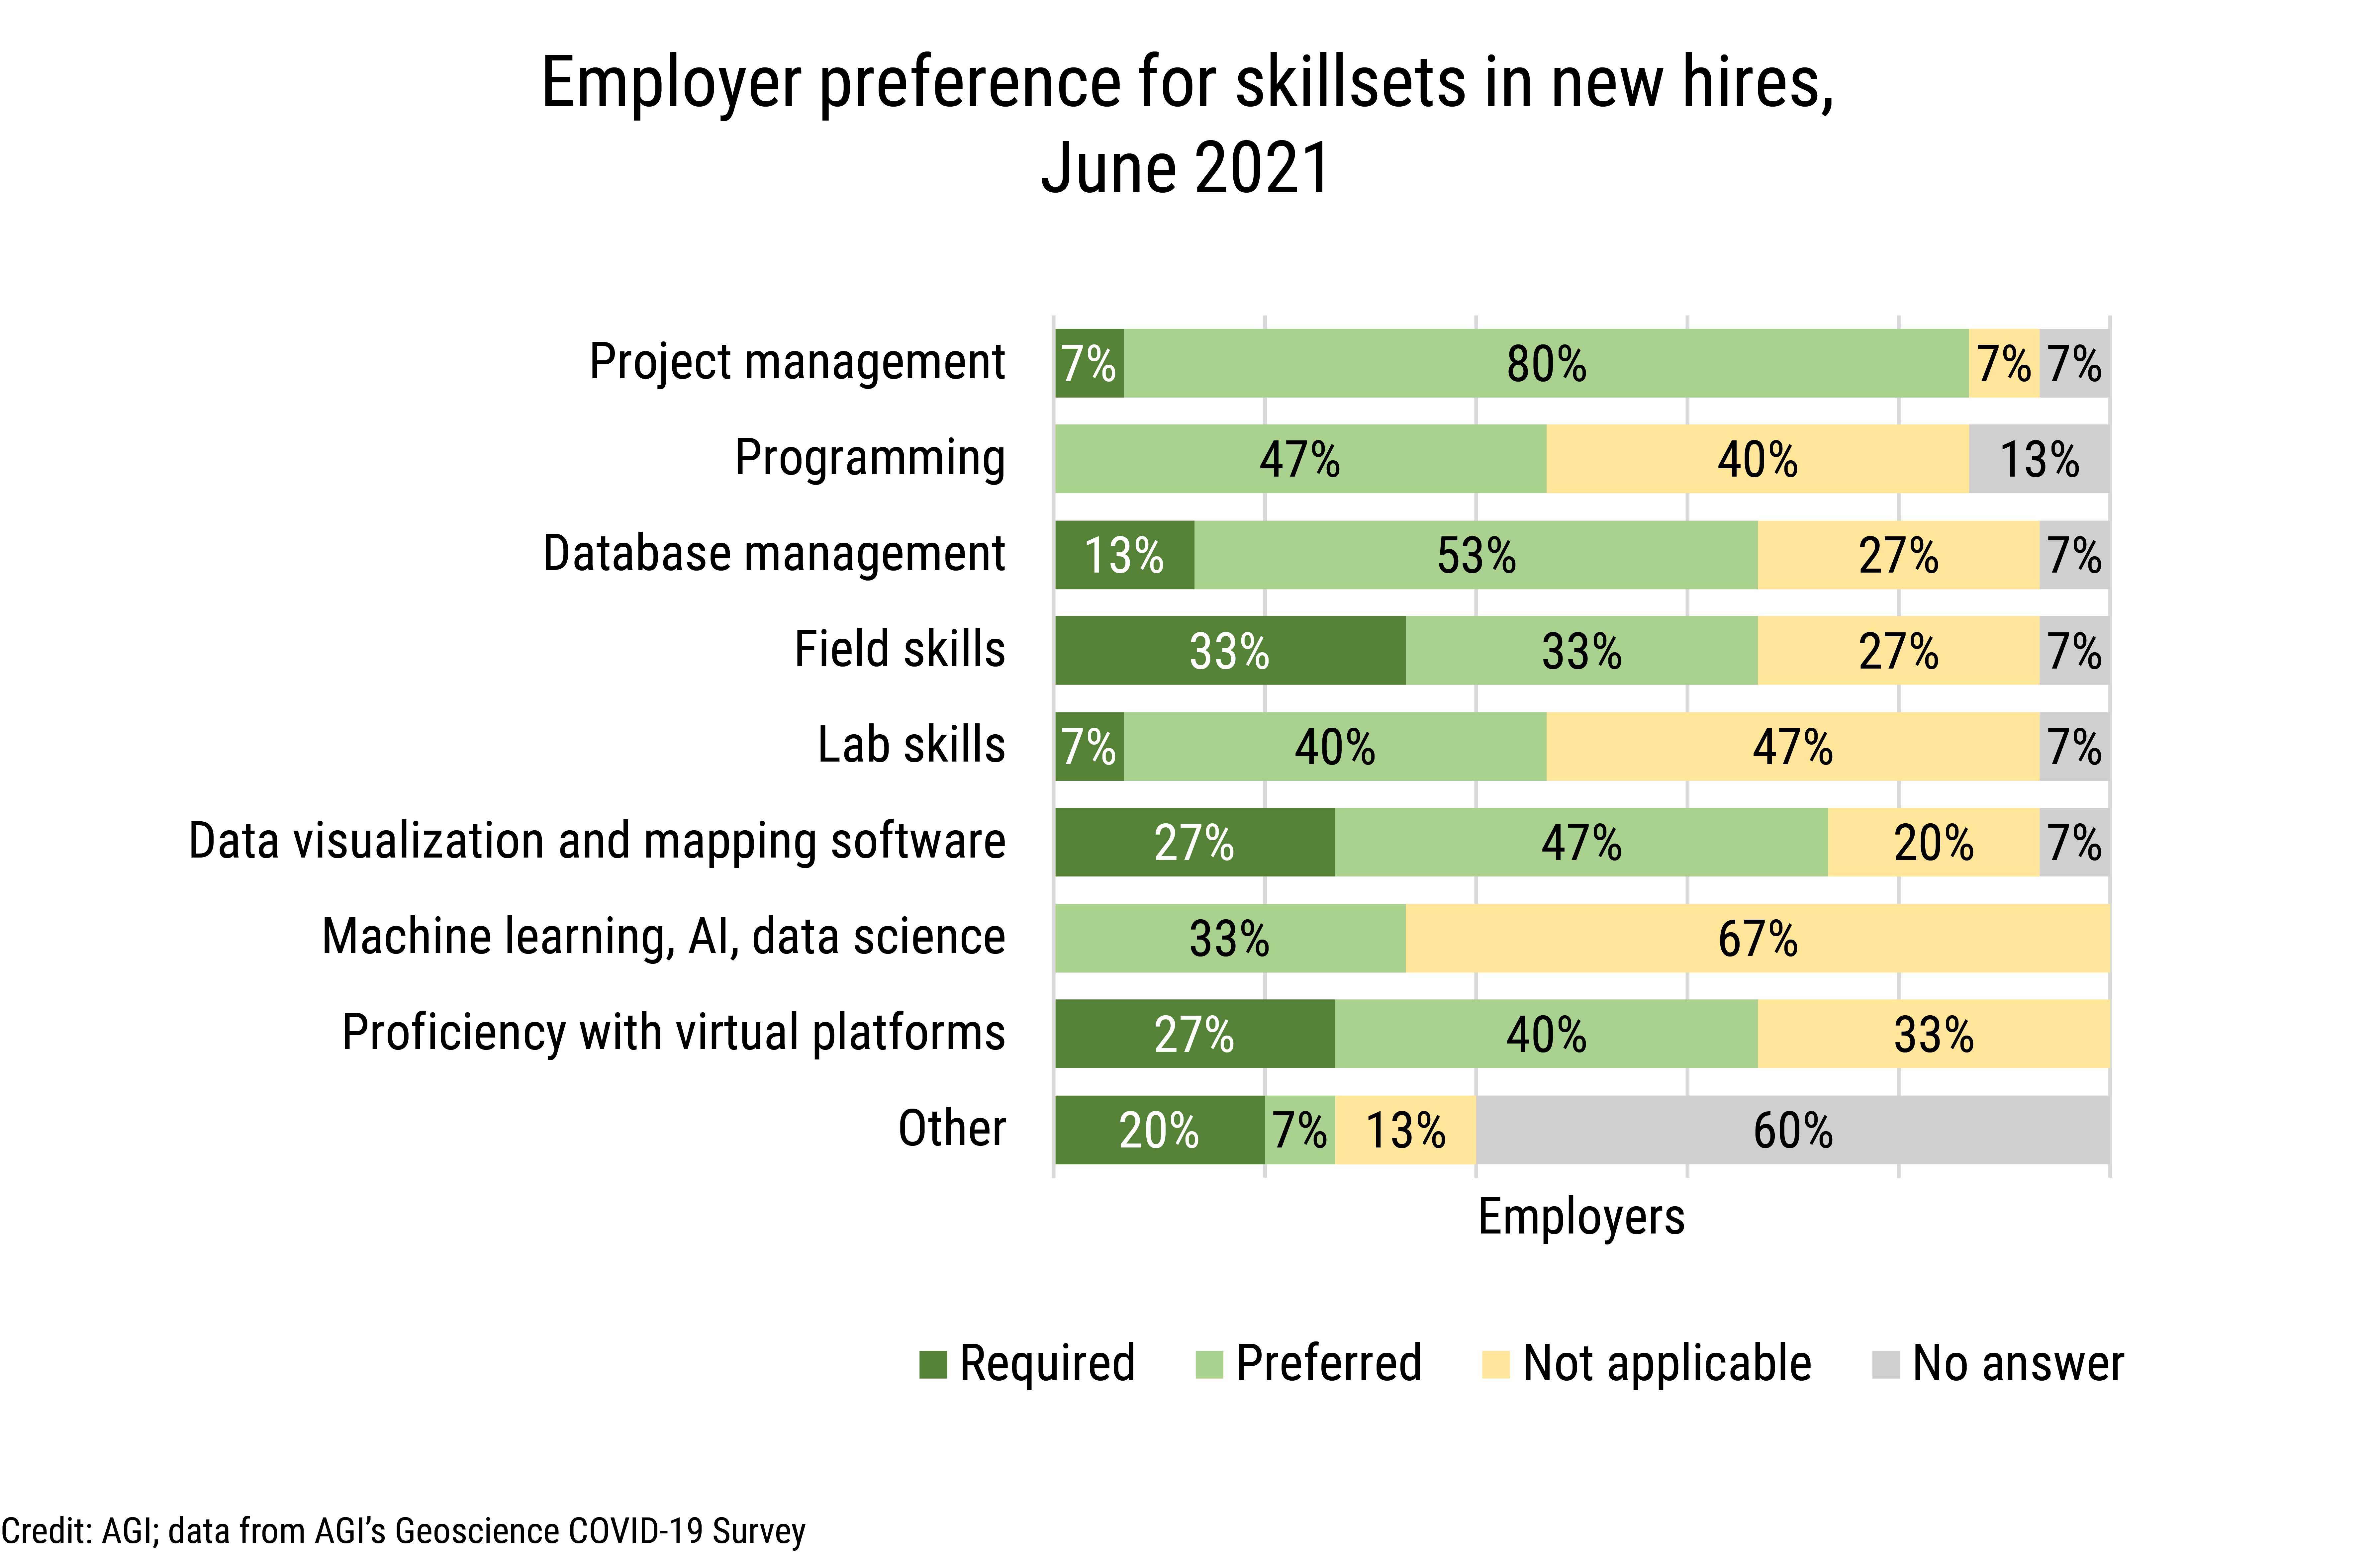 DB_2021-030 chart 10: Employer preference for skillsets in new hires (Credit: AGI; data from AGI&#039;s Geoscience COVID-19 Survey)